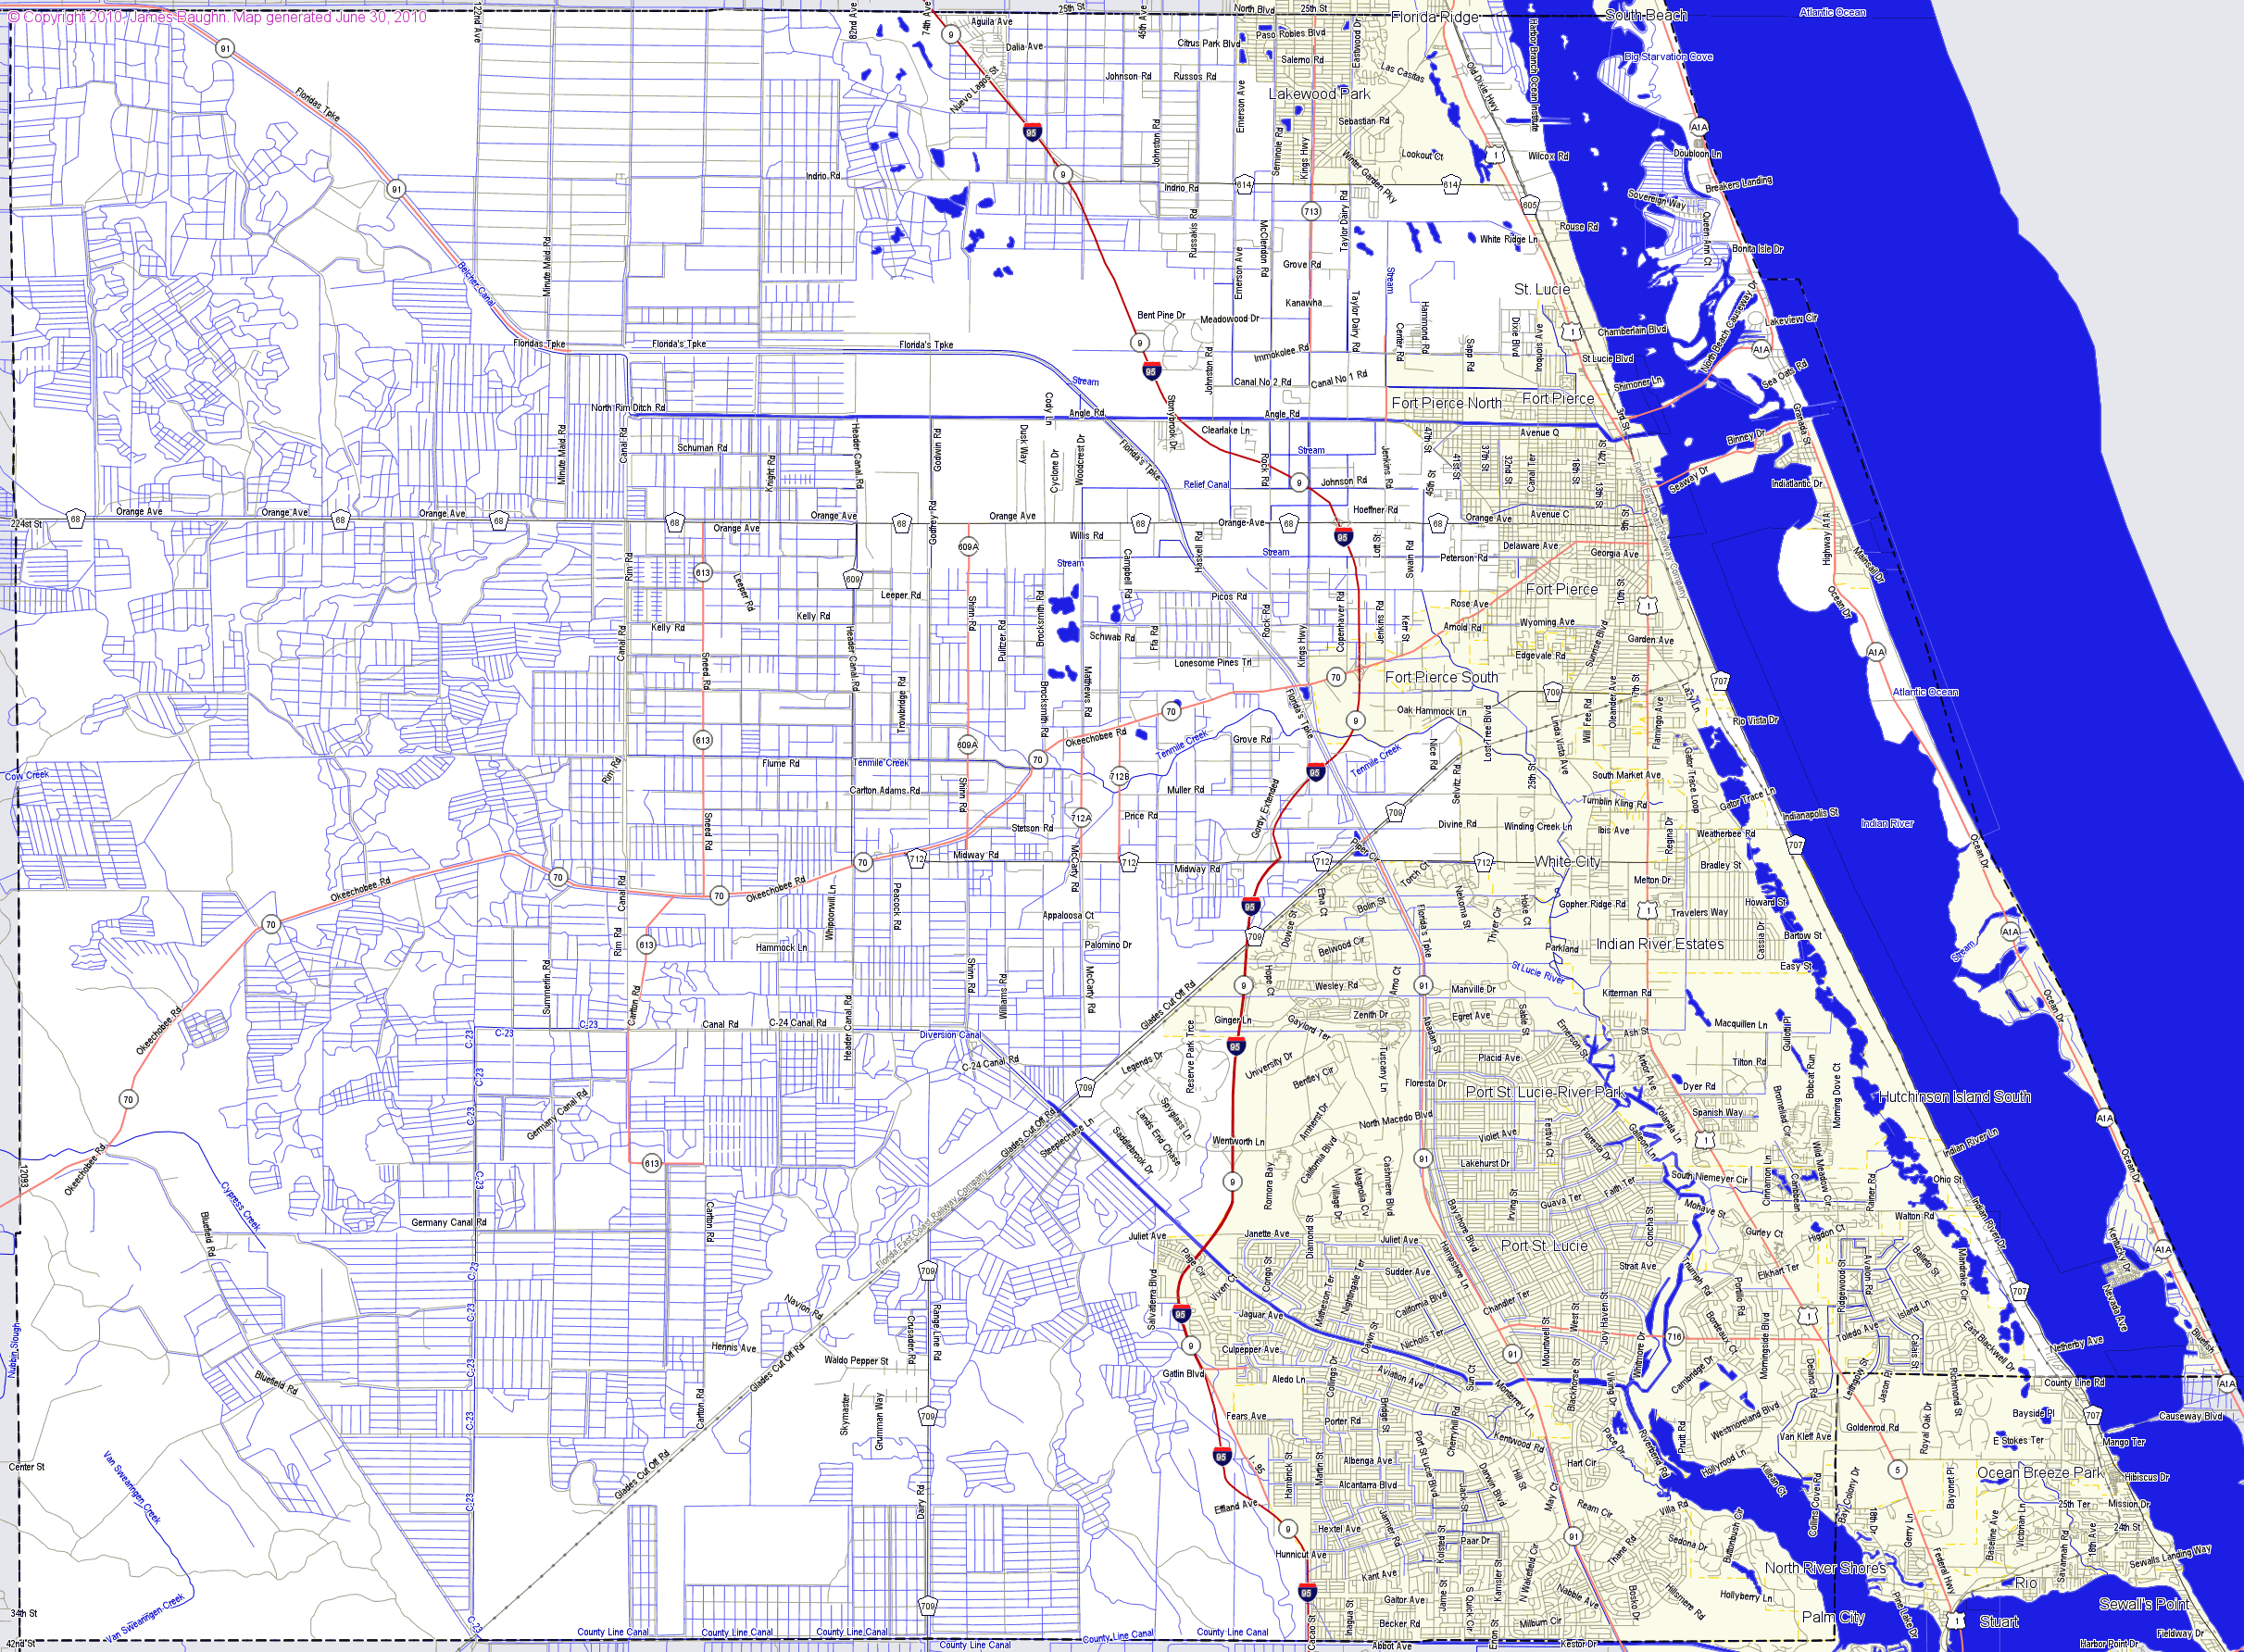 St Lucie County Florida Flood Zone Map CountiesMap com